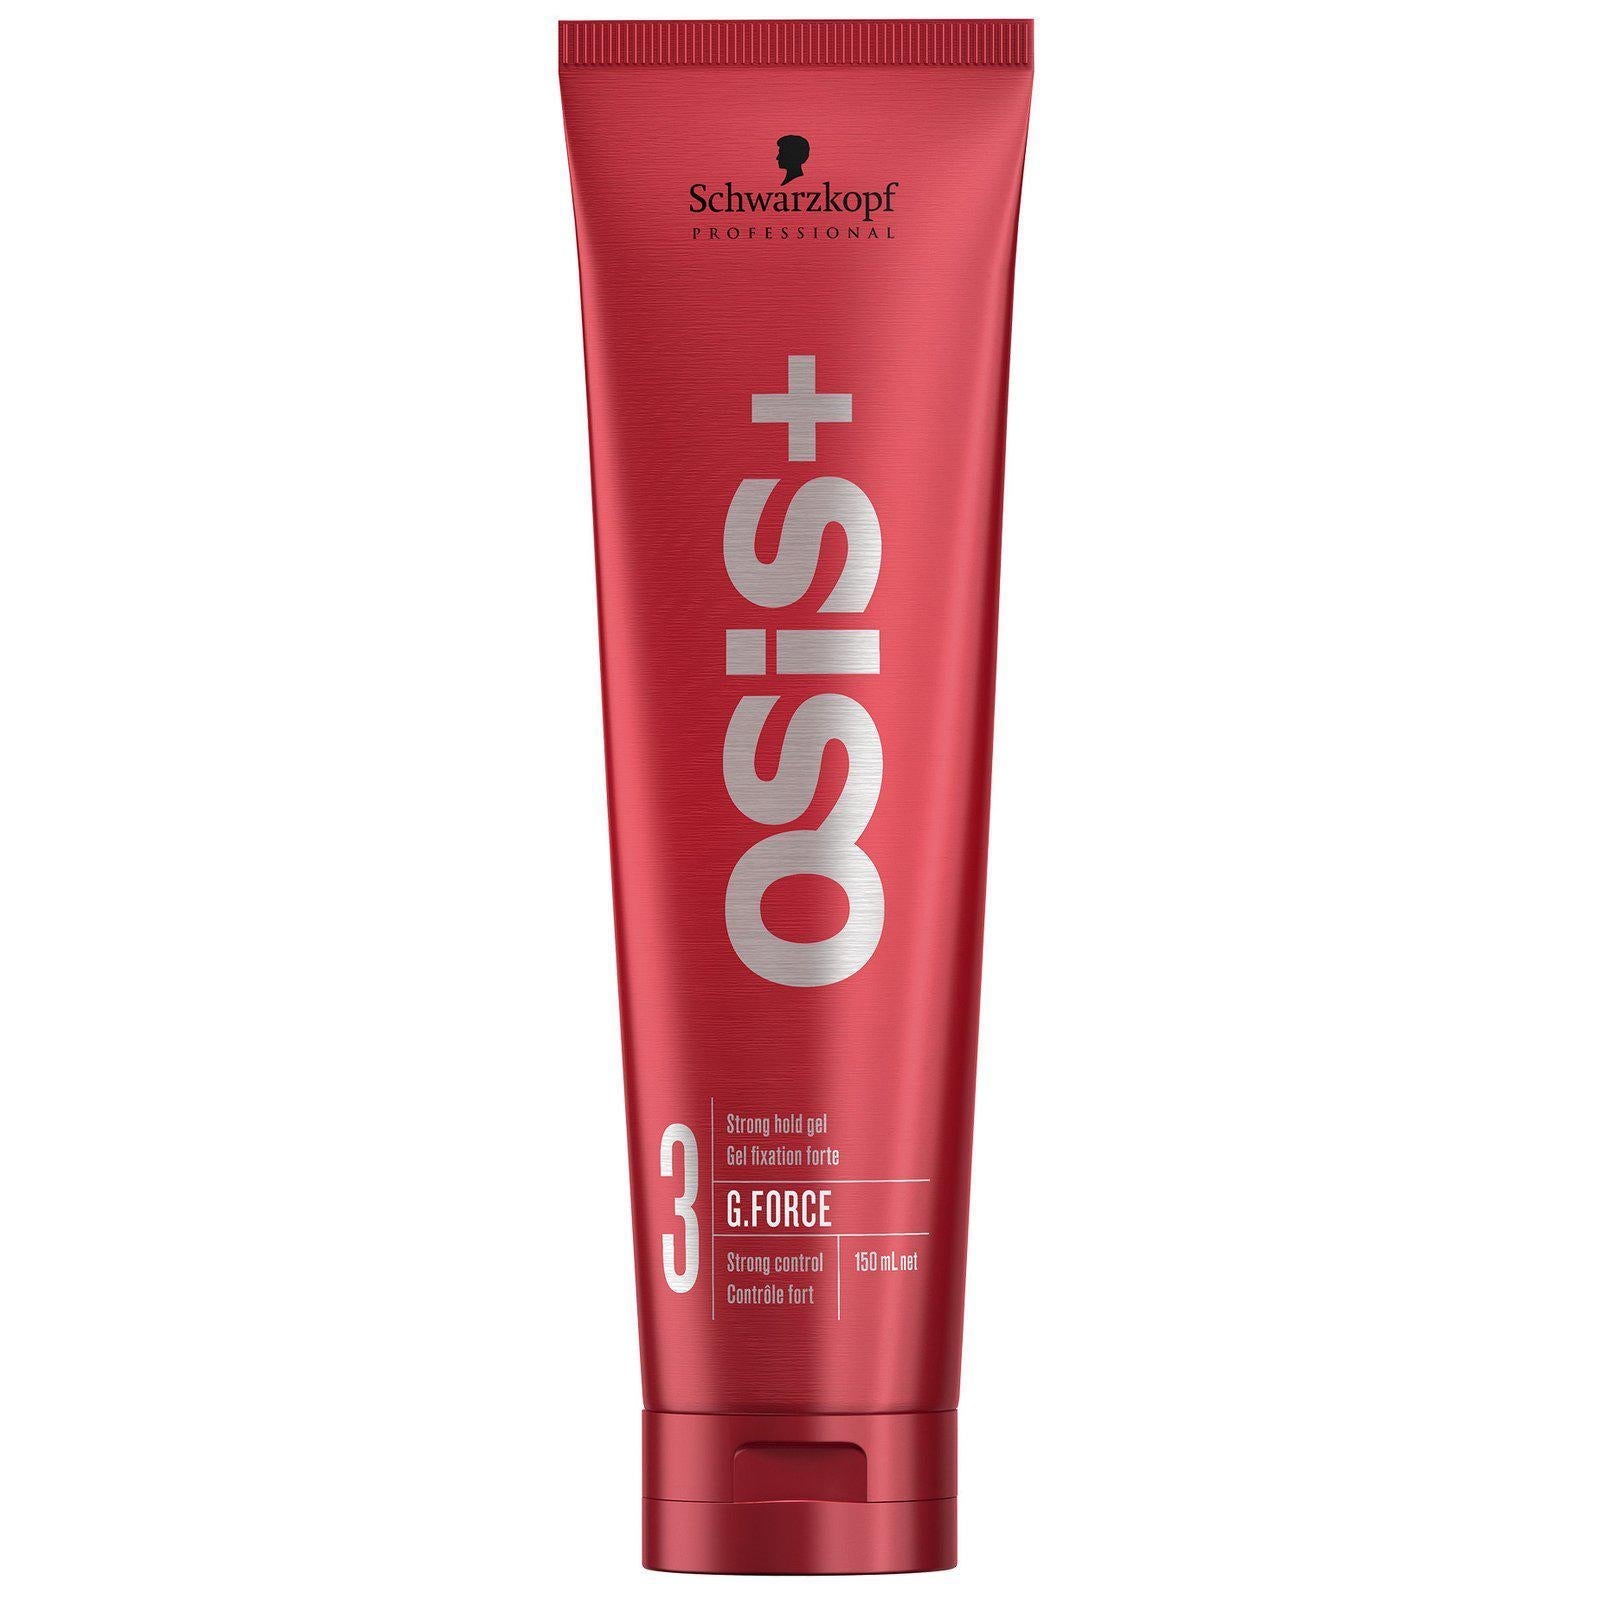 Osis G.Force 150ml